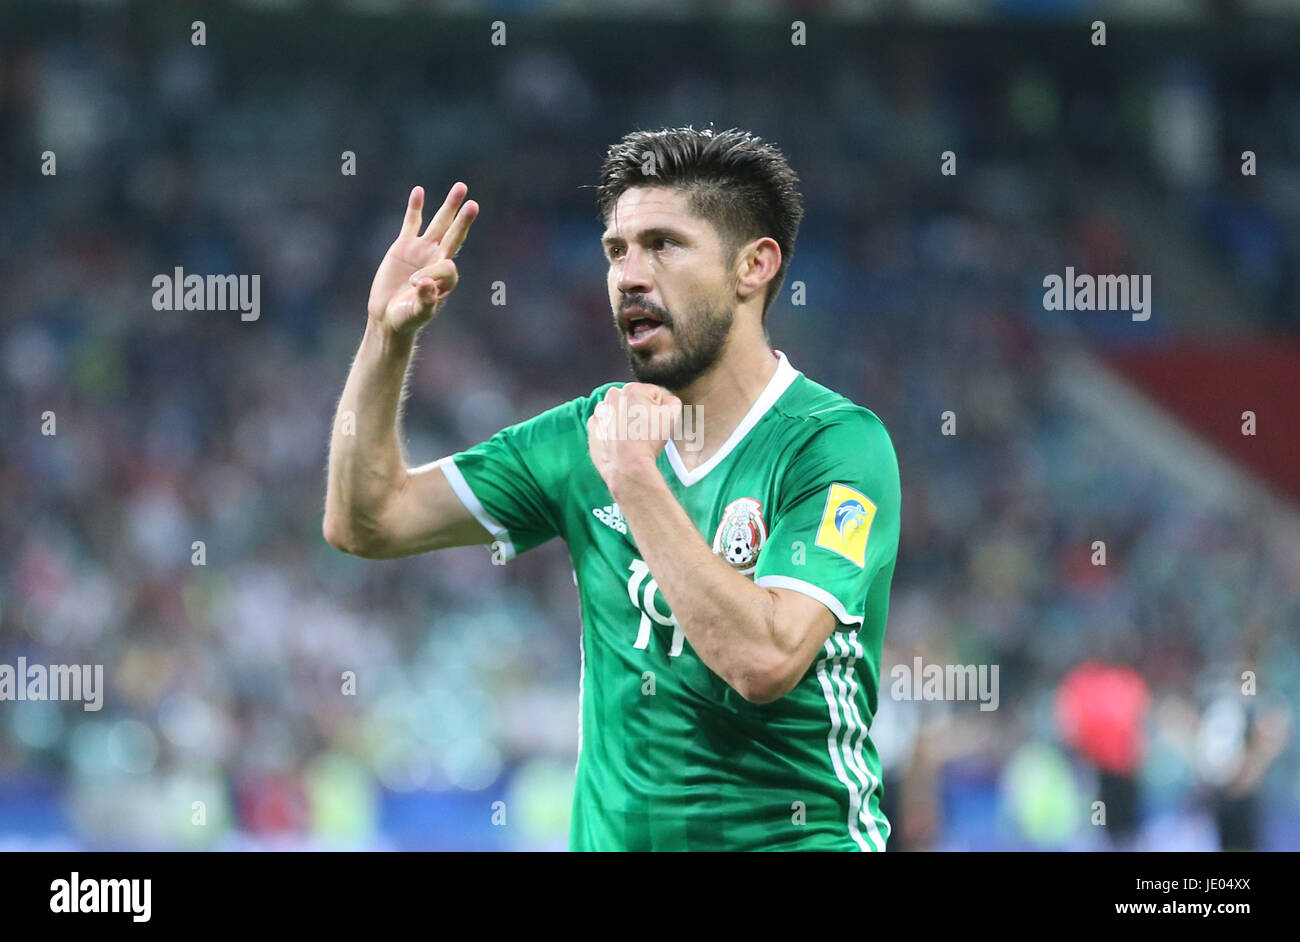 Sochi, Russia. 21st June, 2017. Oribe Peralta of Mexico celebrates scoring during the group A match between Mexico and New Zealand of the 2017 FIFA Confederations Cup in Sochi, Russia, on June 21, 2017. Mexico won 2-1. Credit: Xu Zijian/Xinhua/Alamy Live News Stock Photo